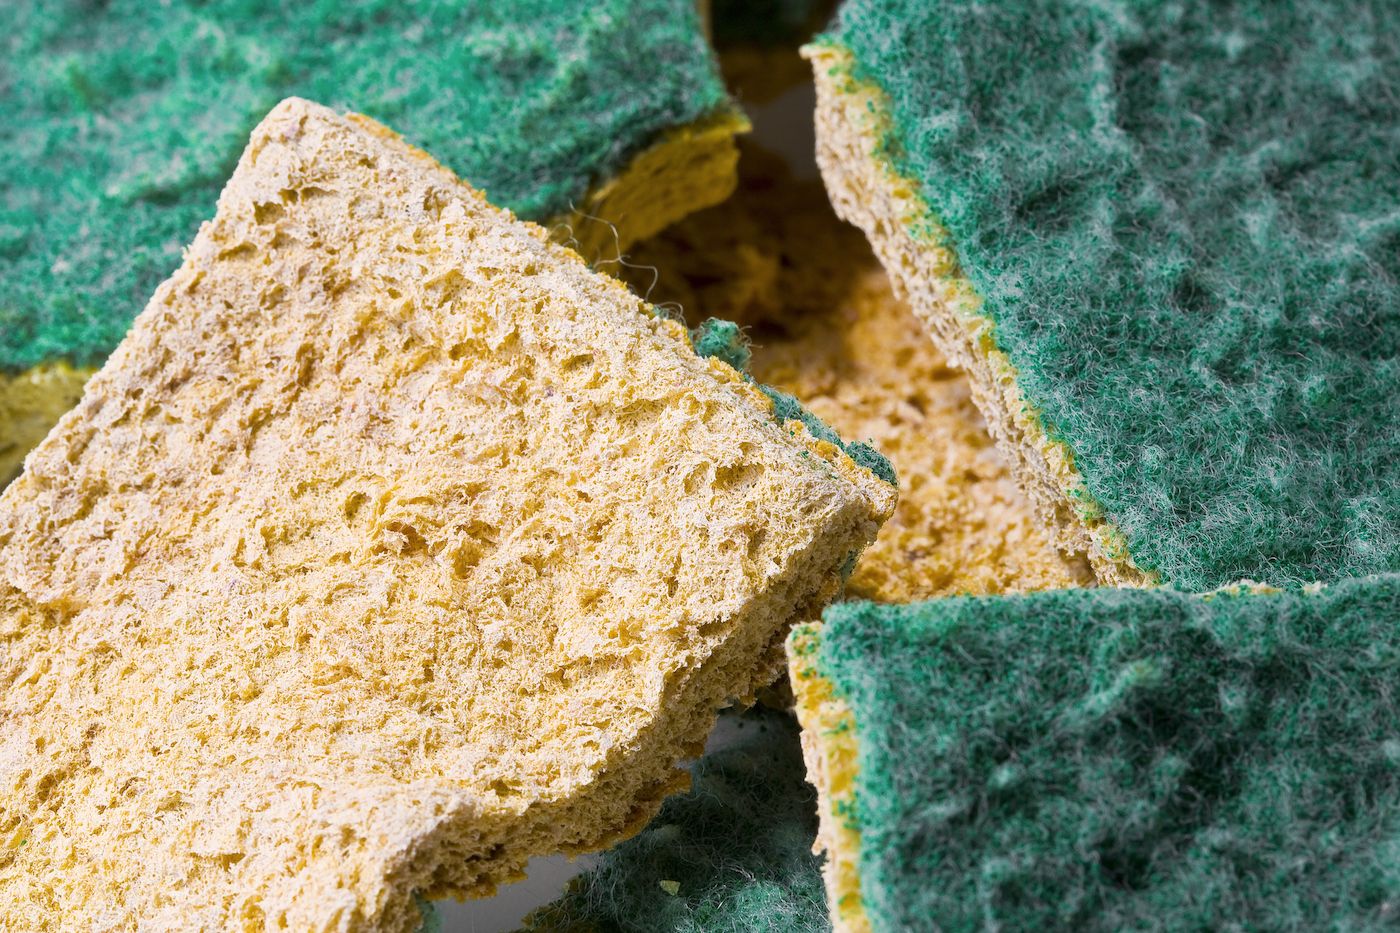 Why Sponges Harbor So Much Bacteria